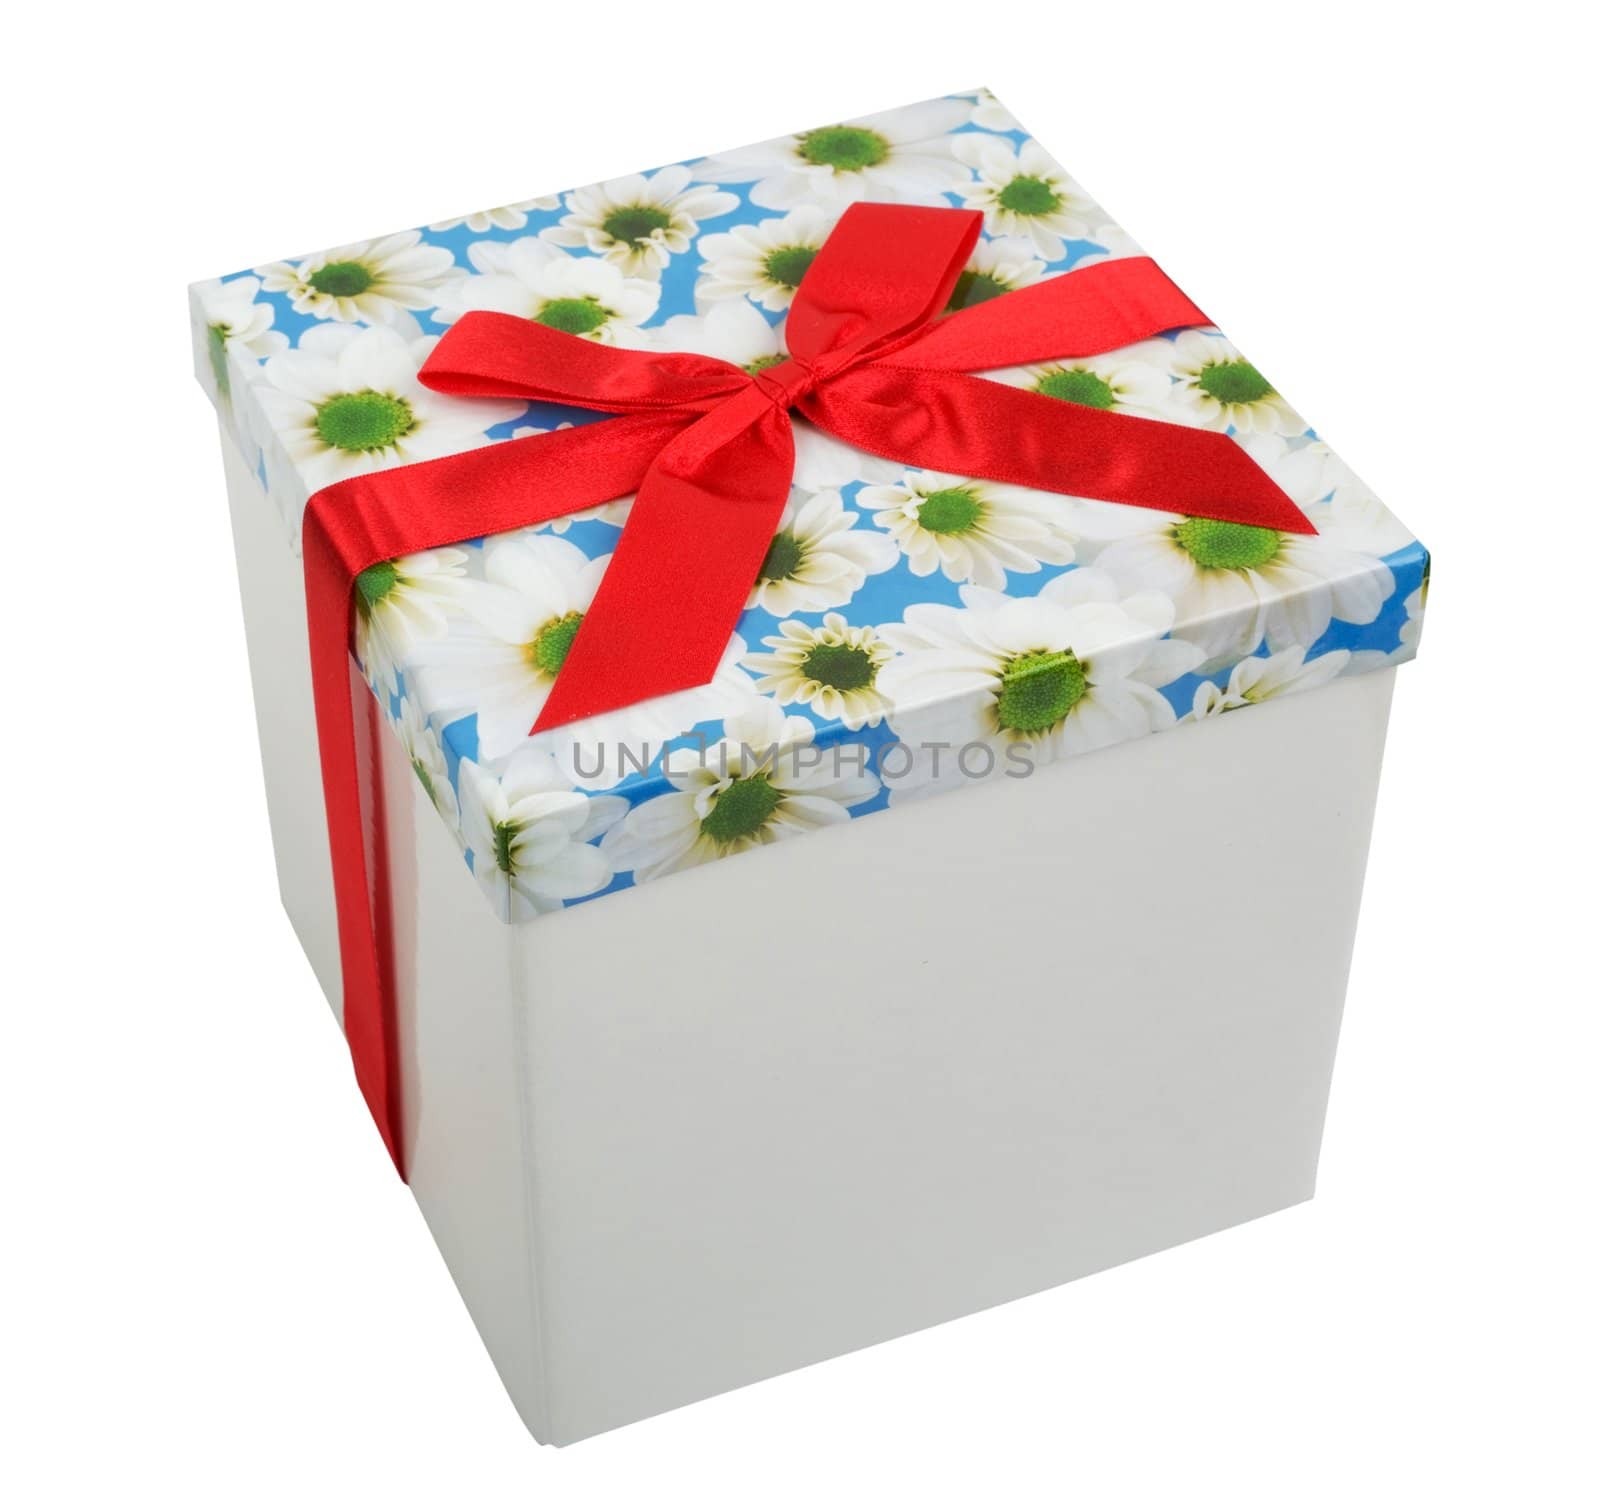 An image of isolated box with red ribbon